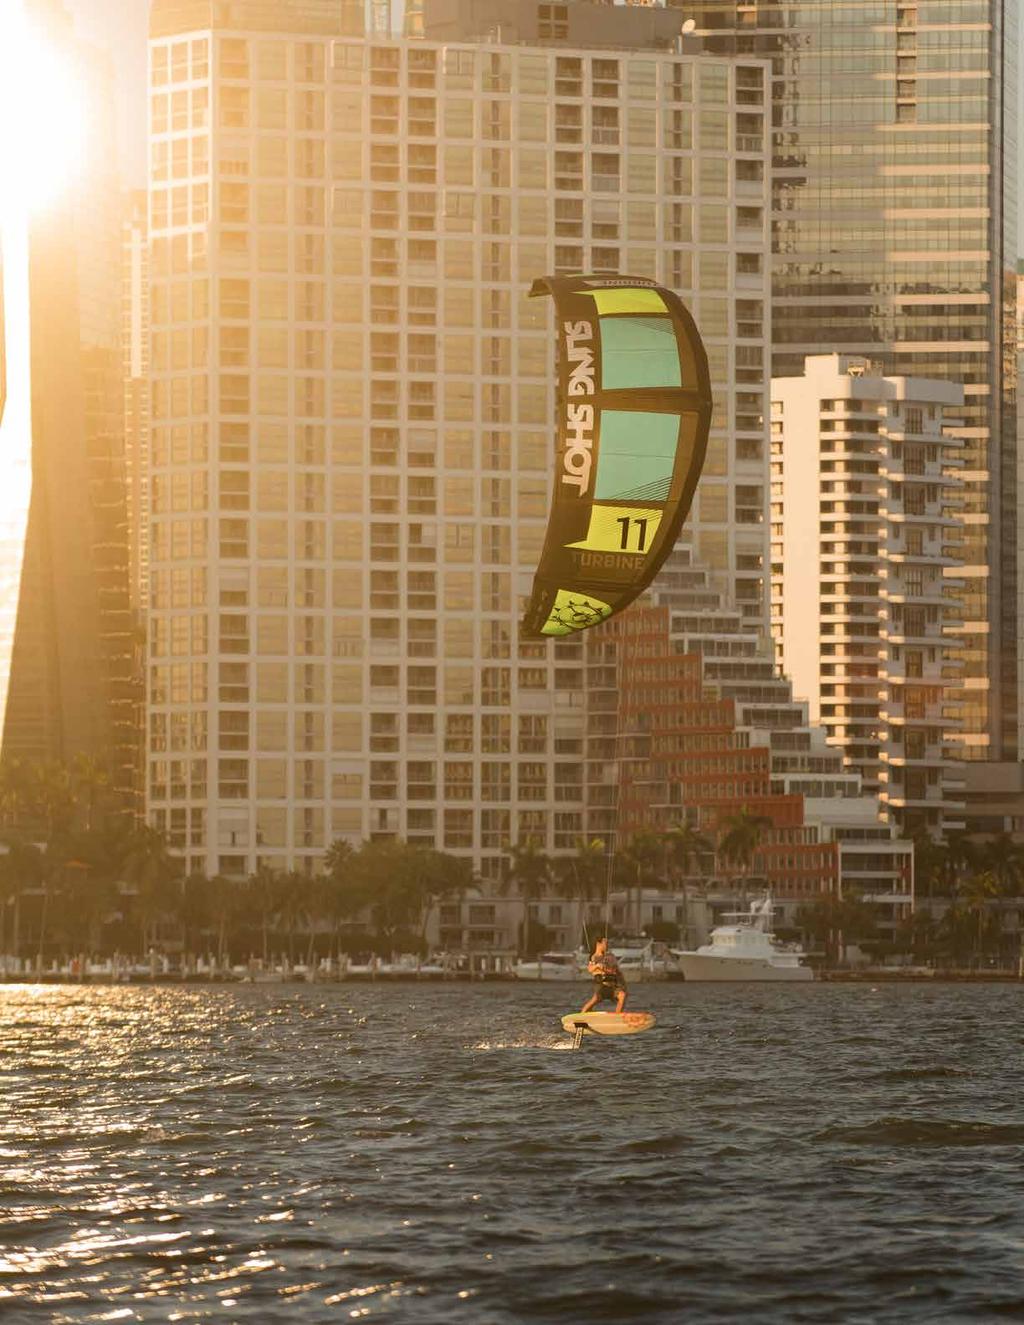 2019 ALIEN AIR SKU: 19236013 SIZES: 4 8 PACKAGE INCLUDES: ALIEN AIR BOARD, PEDESTAL MOUNTING HARDWARE CELEBRATING 20 YEARS OF SLINGSHOT ALEX FOX GOLDEN HOUR IN MIAMI / PHOTO: MO LELII TECH SPECS: